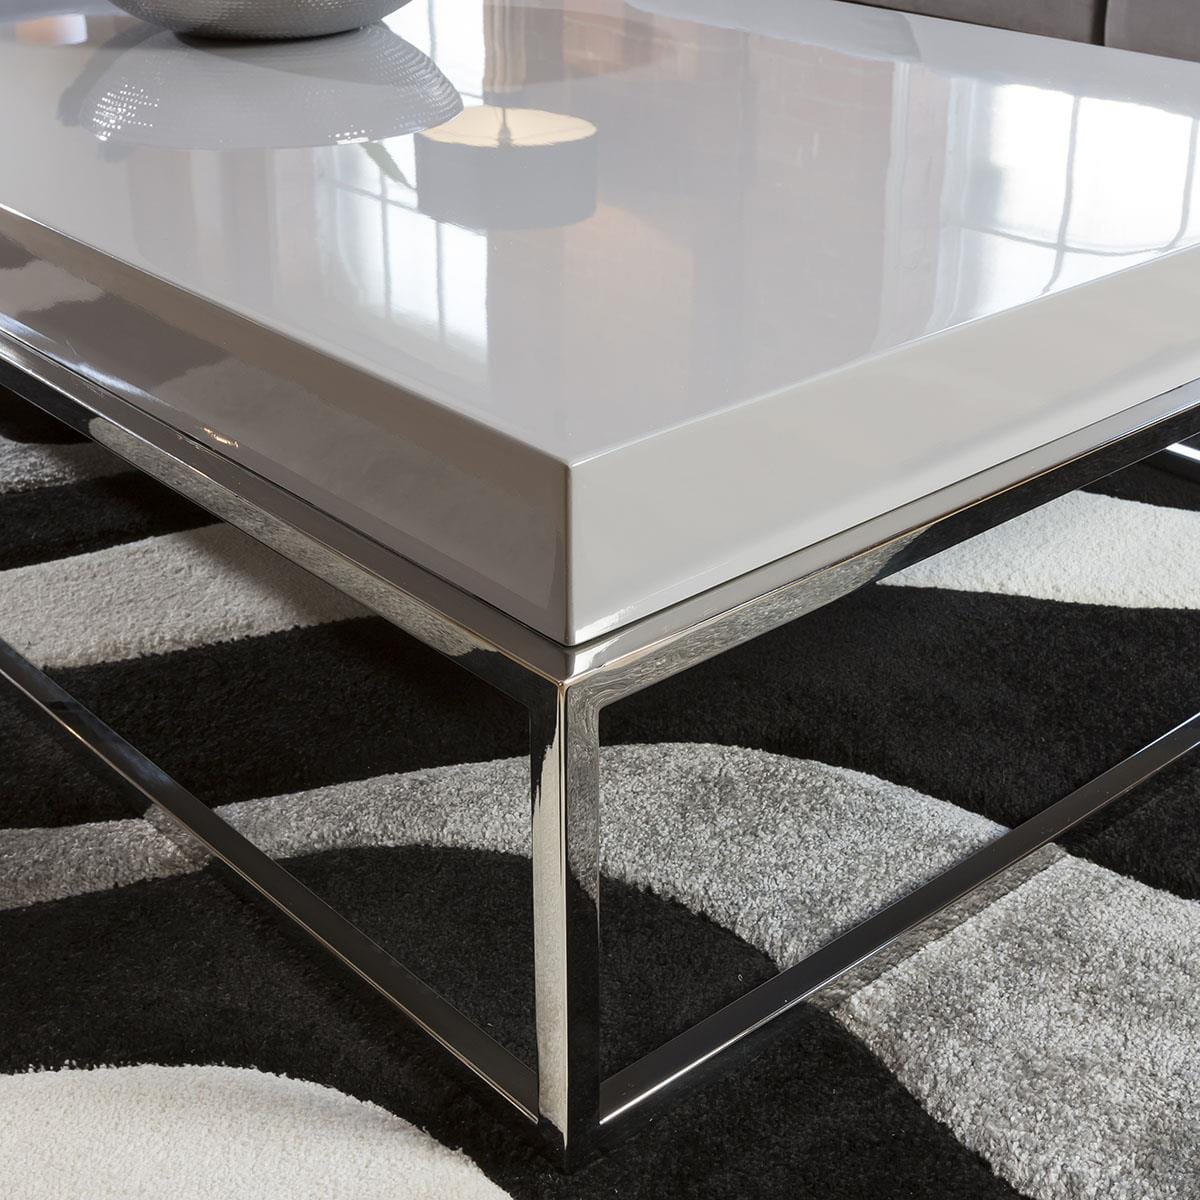 Quatropi Stainless Steel Framed 1500 x 800 Coffee Table Grey Gloss Wood Top